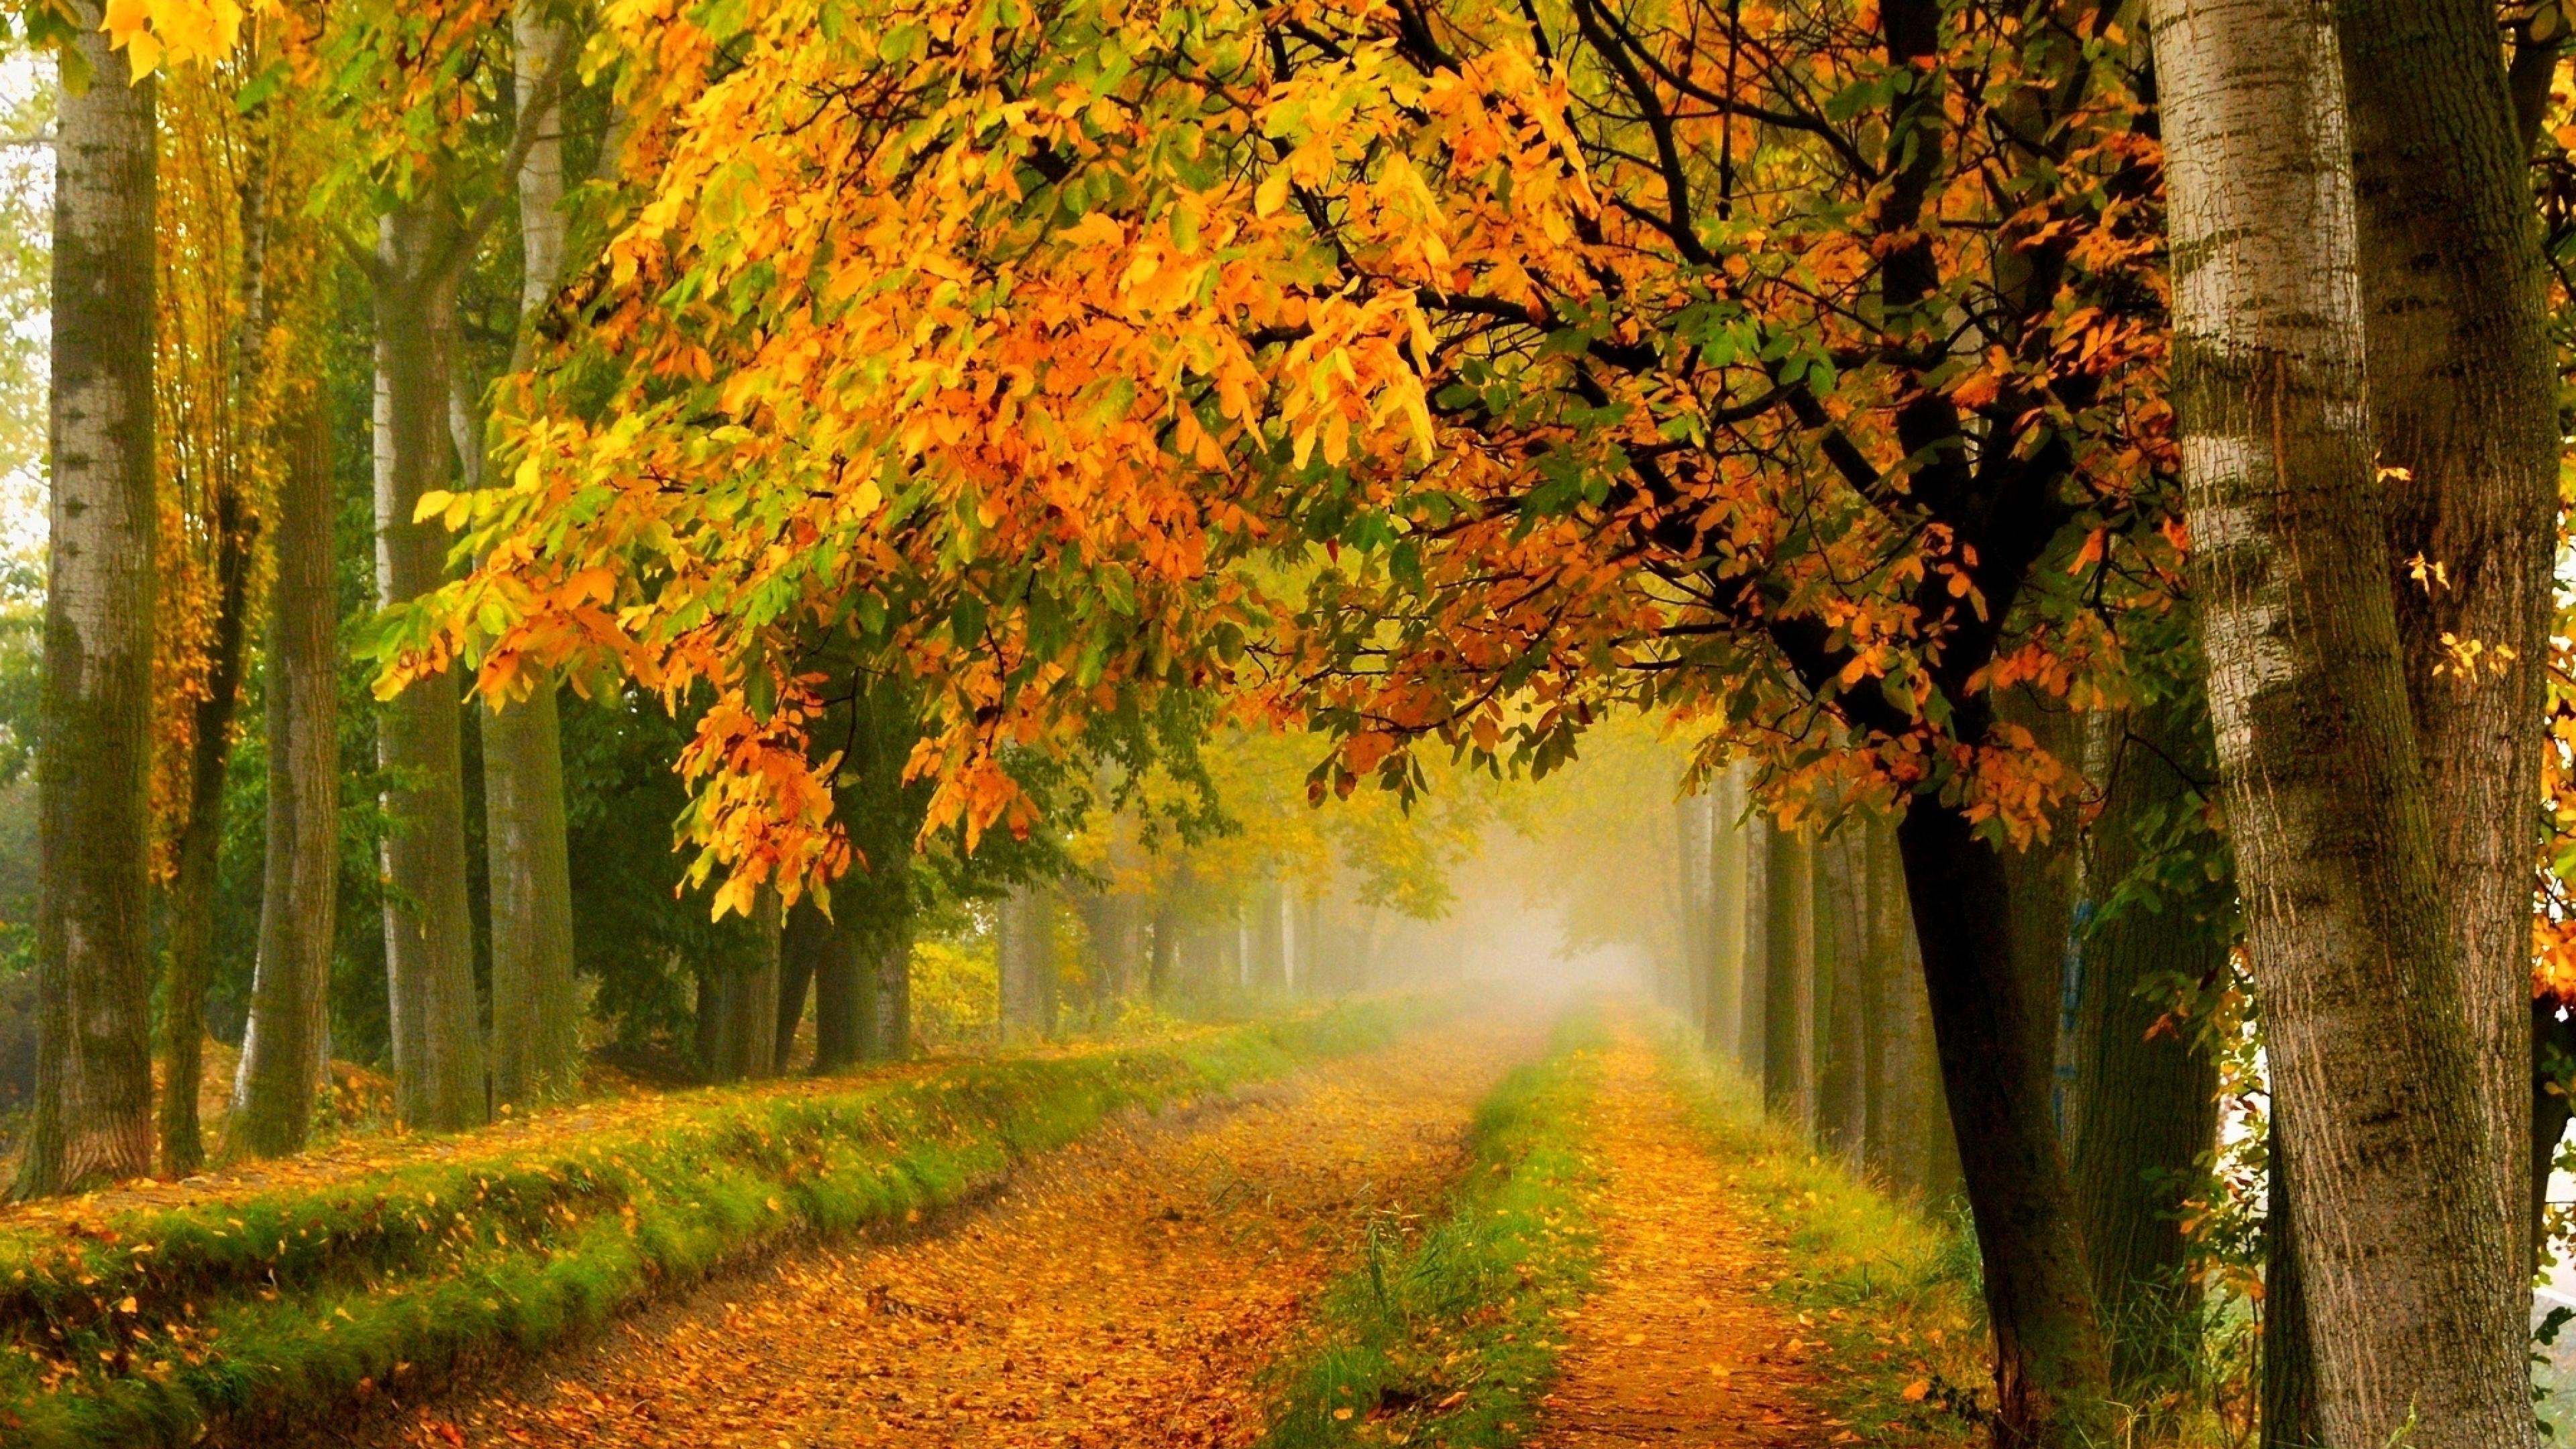 Background Autumn Trees With Yellow Leaves Country Road 3840x2160